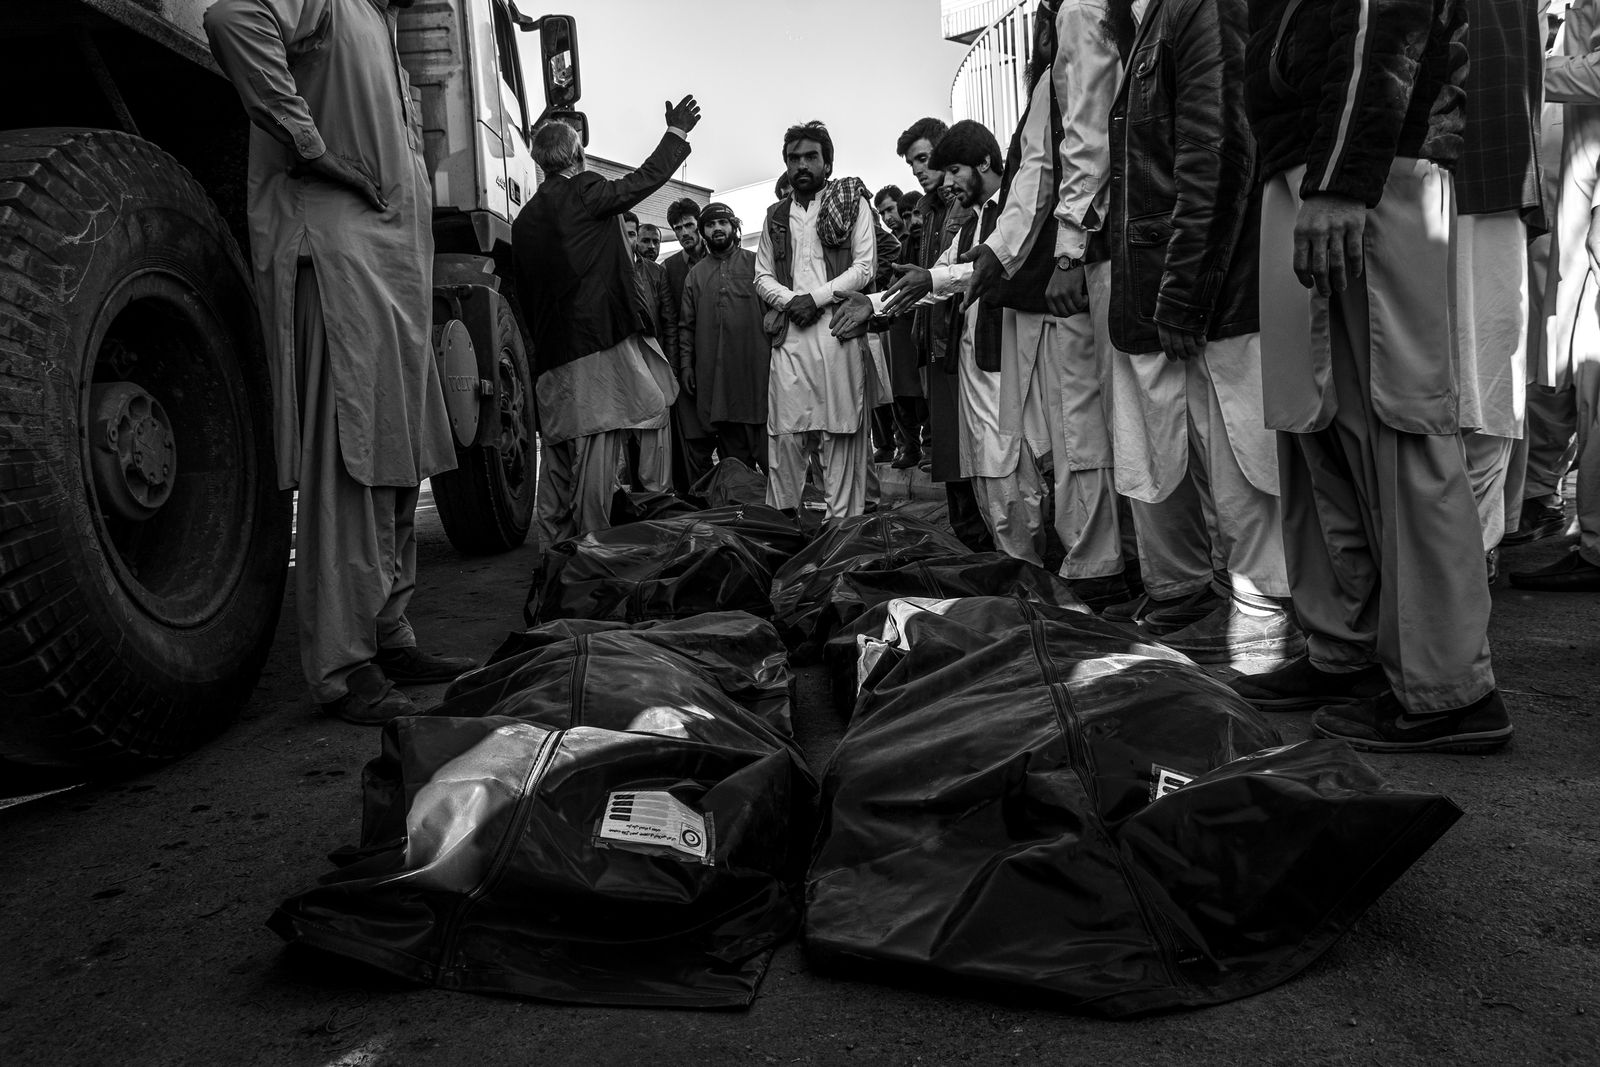 © Zobair Movahhed - Local Iranian people pray over the bodies of Afghan refugees who died in a car accident.